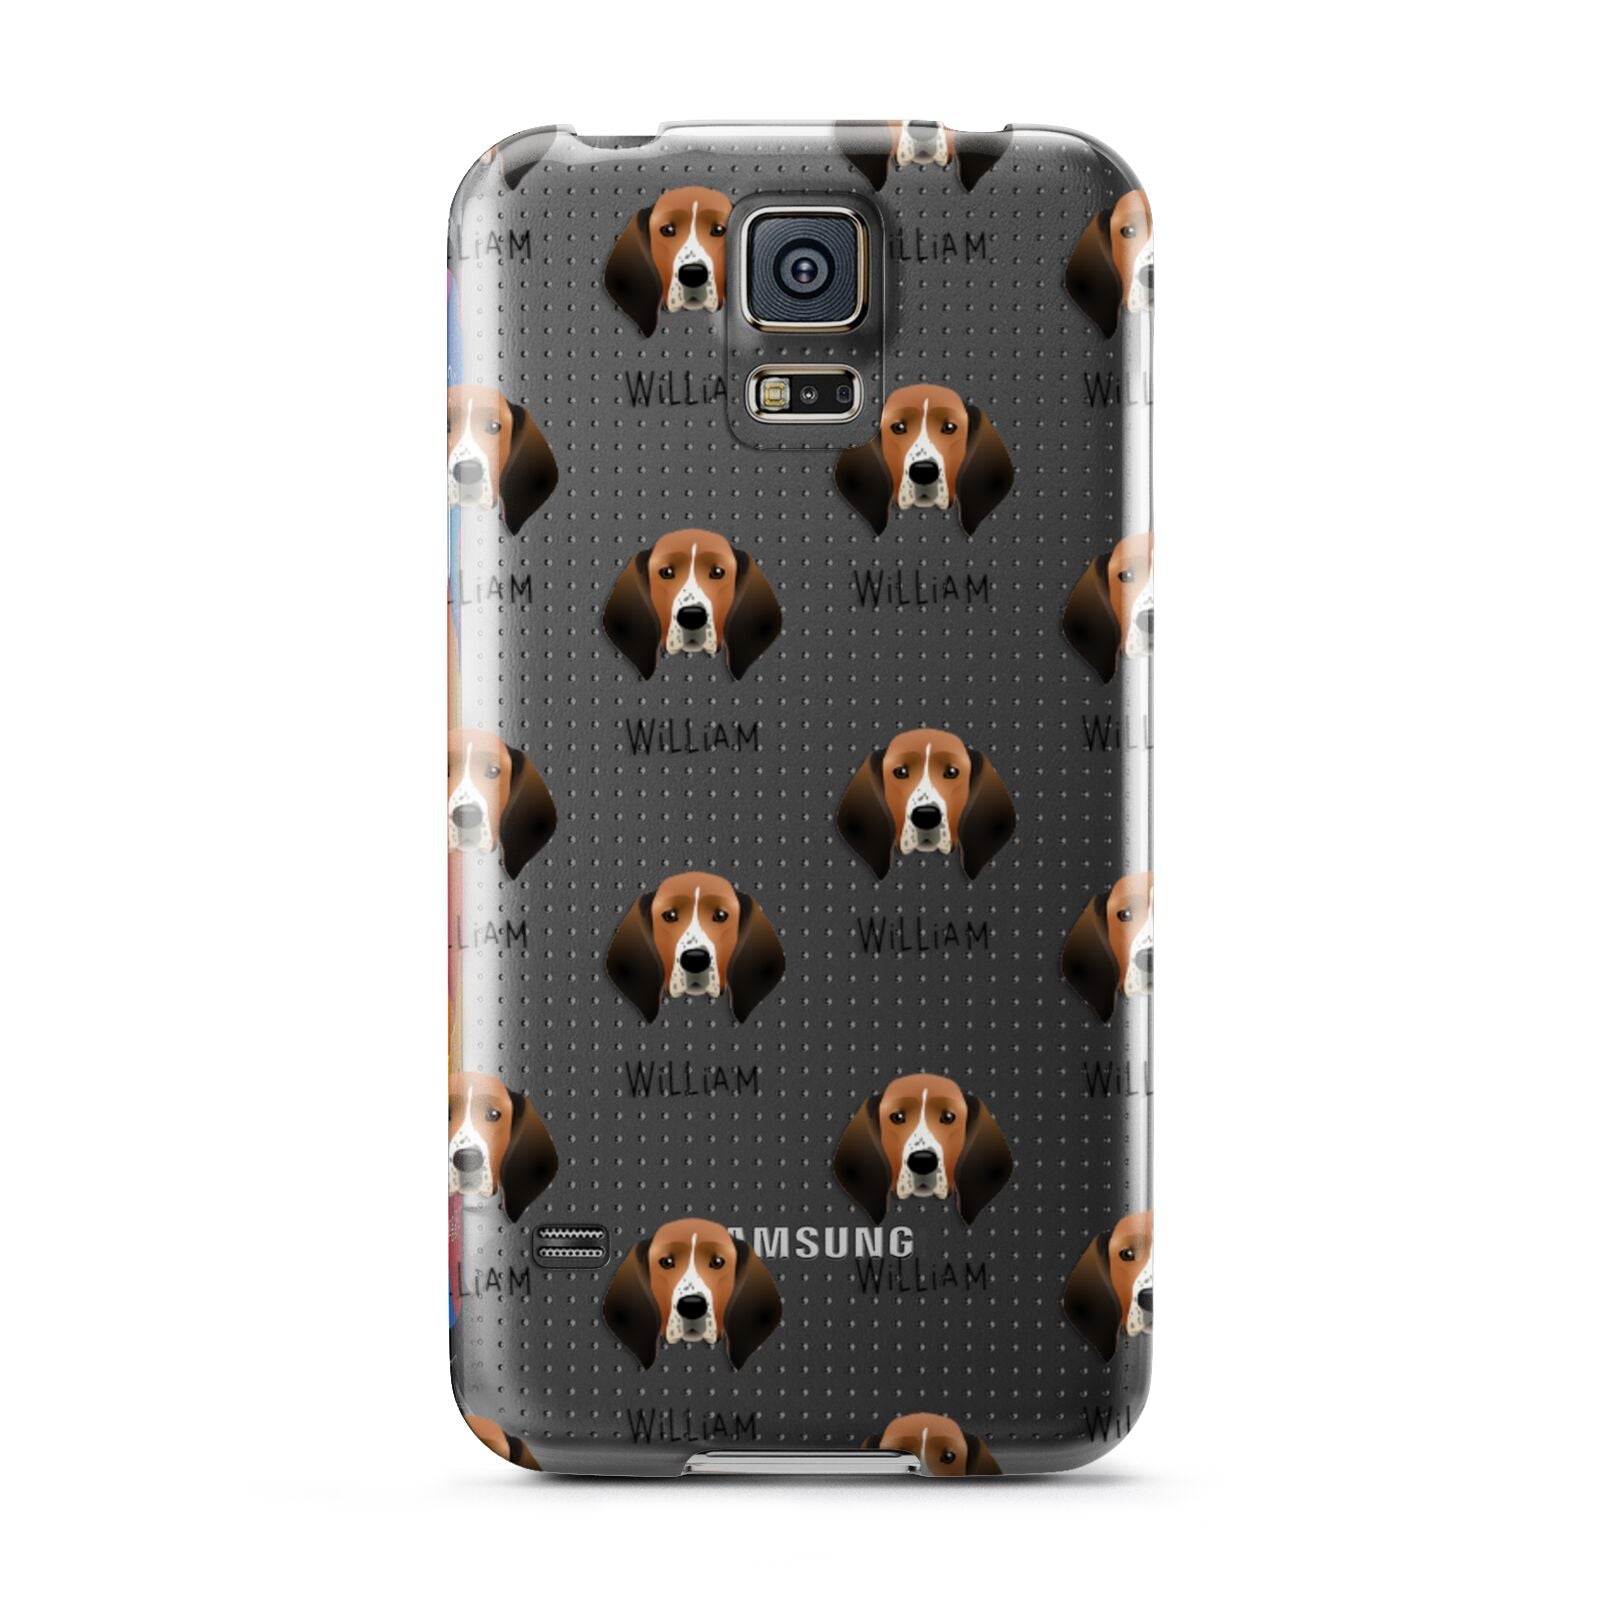 Treeing Walker Coonhound Icon with Name Samsung Galaxy S5 Case